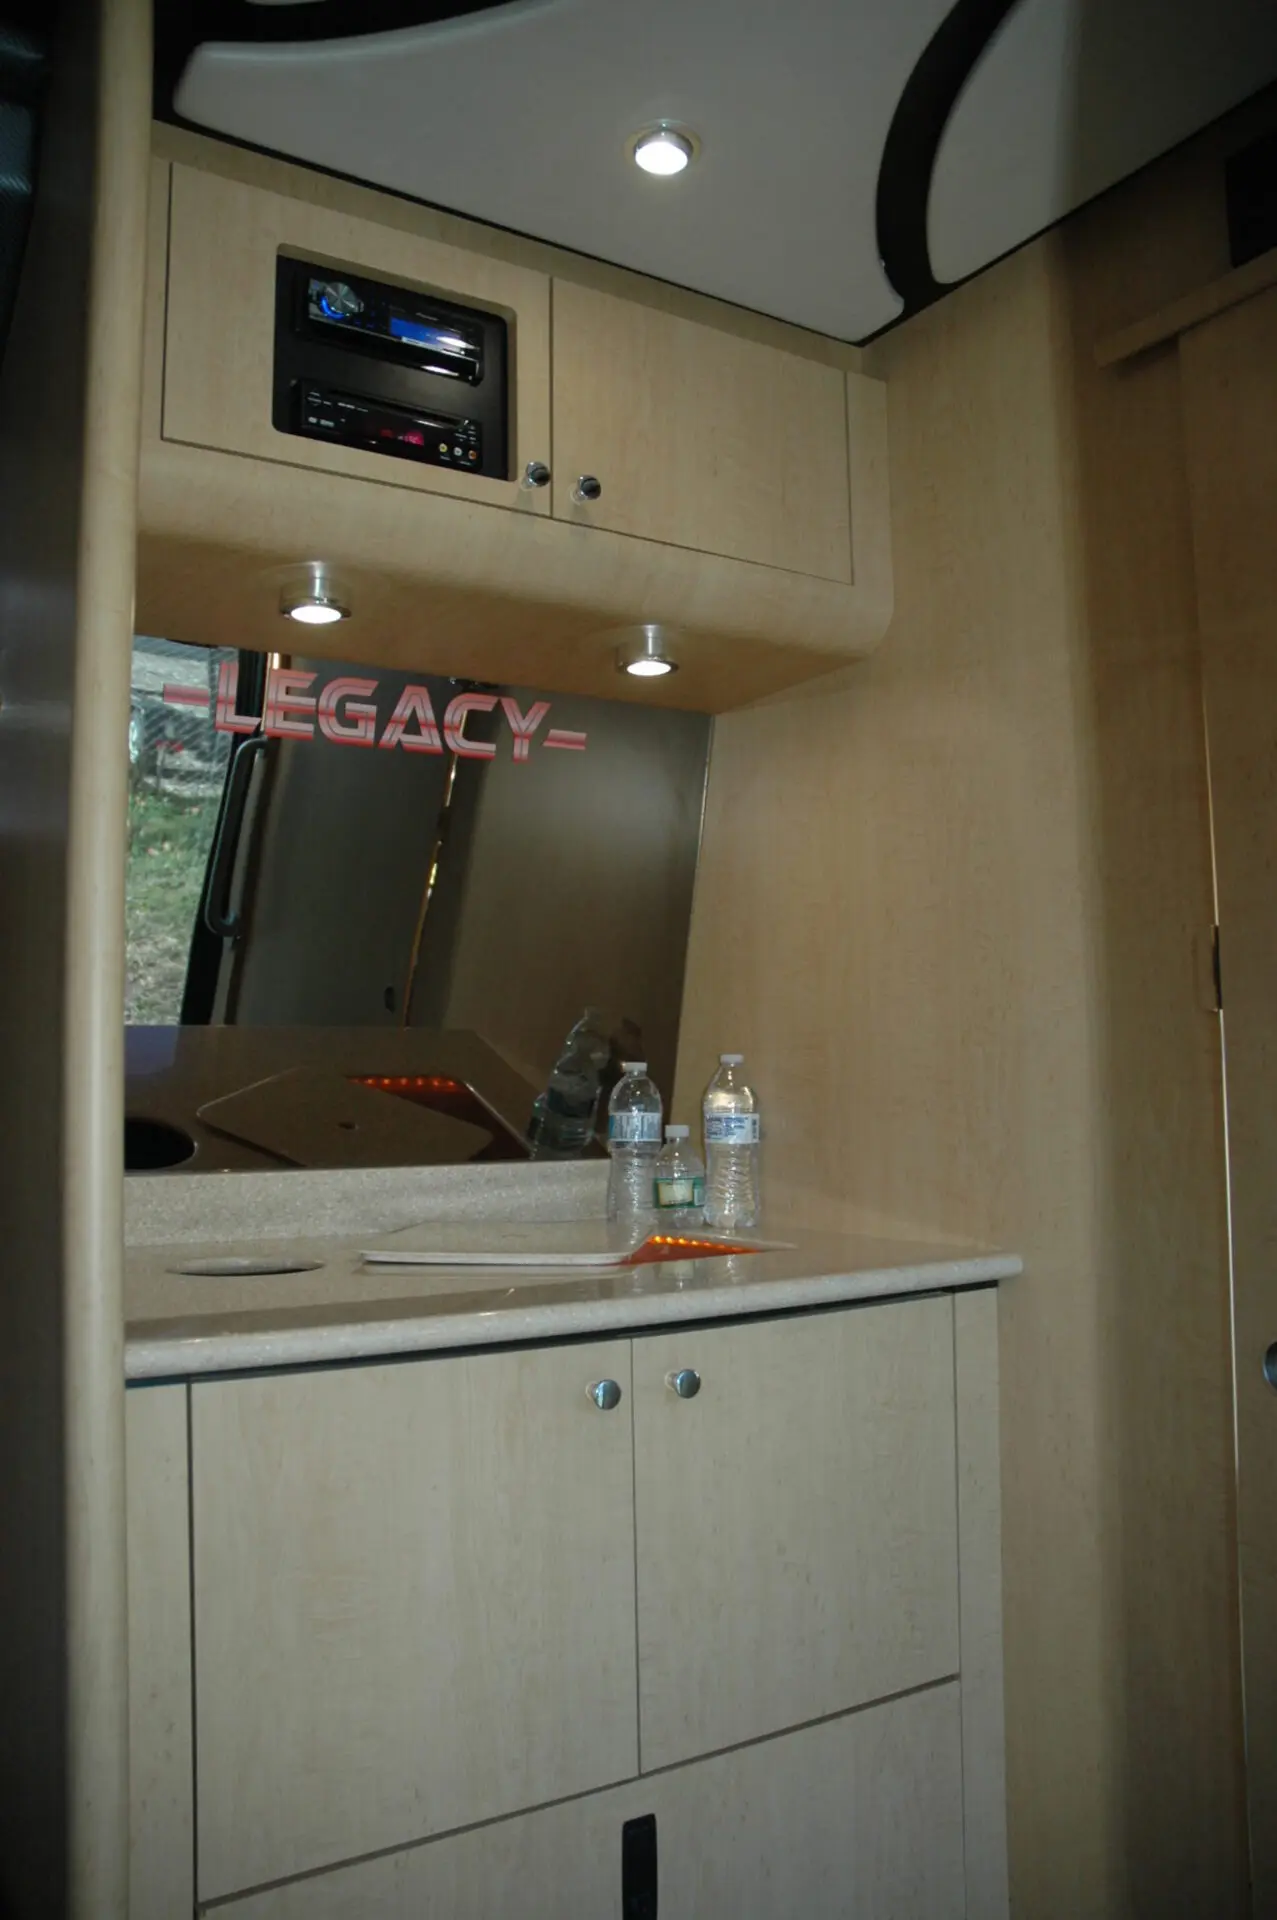 Legacy Counter top